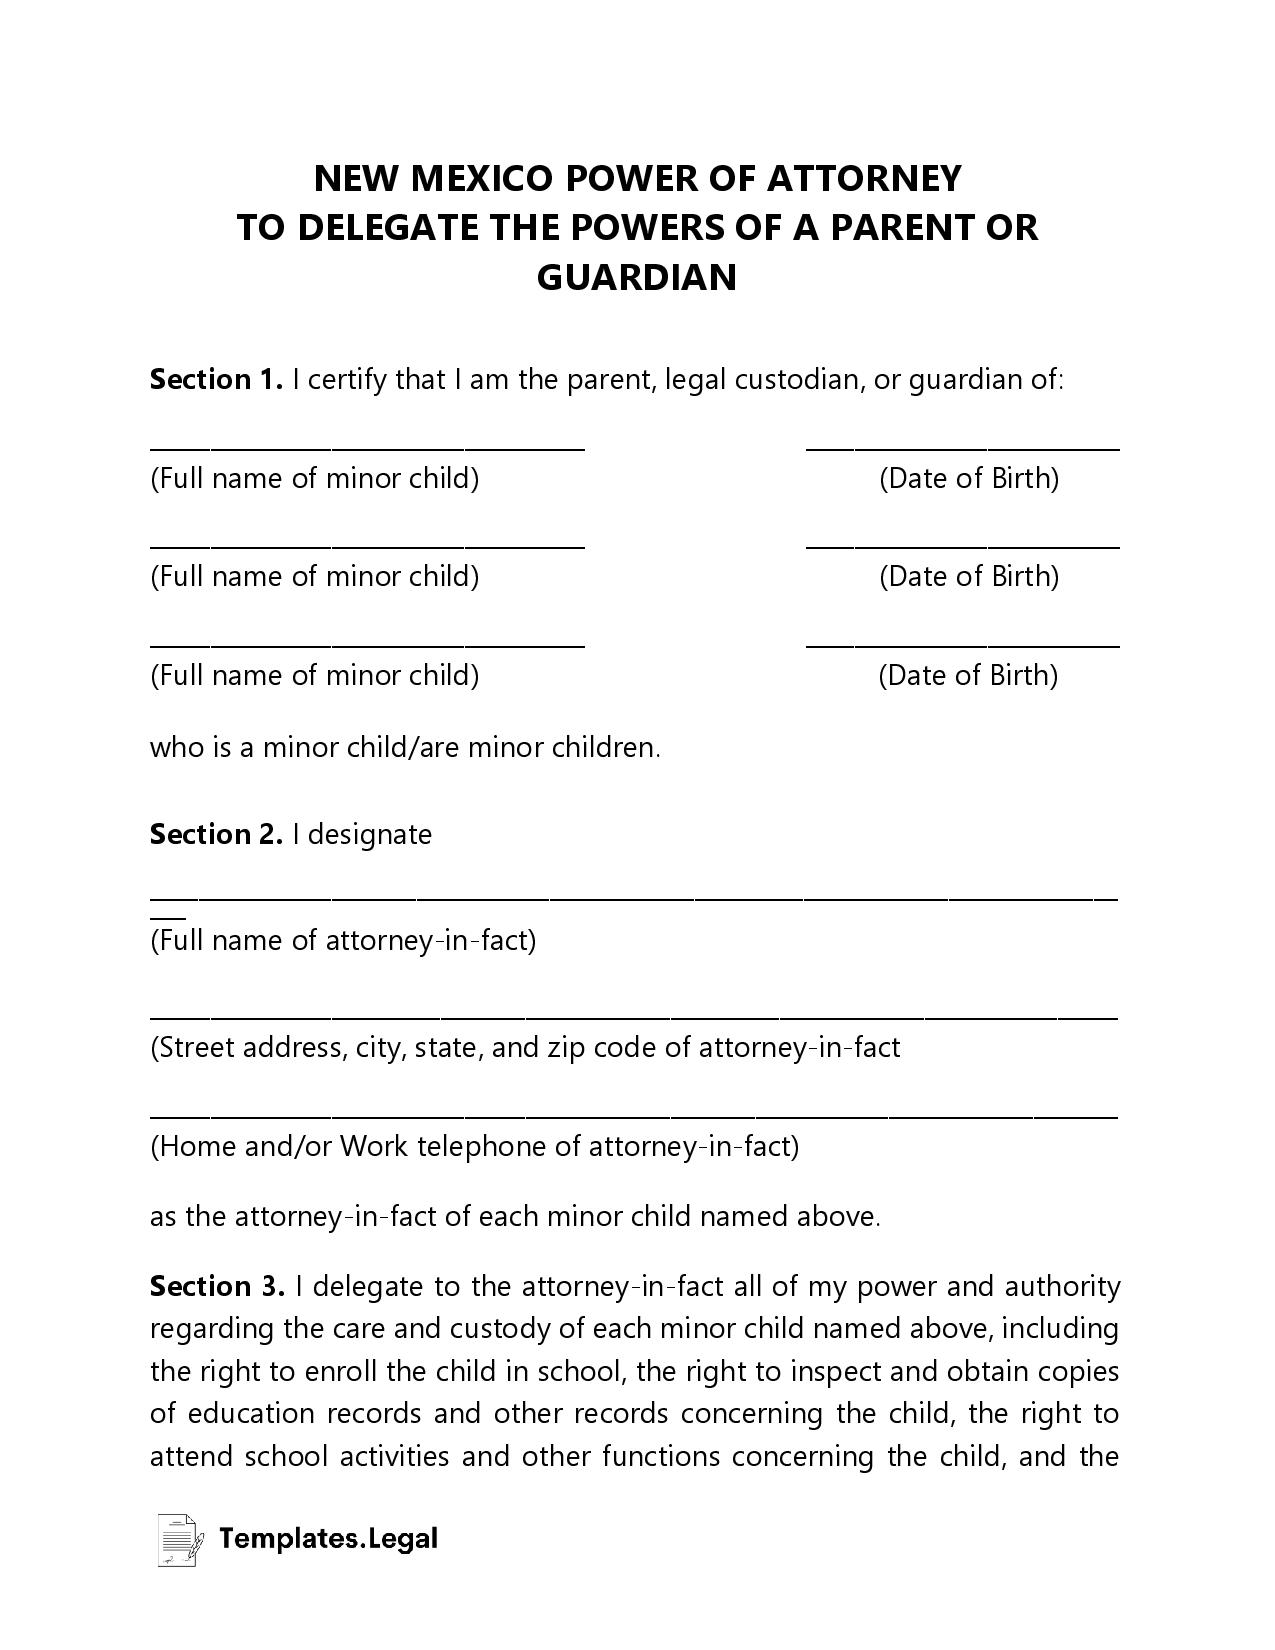 New Mexico Minor (Child) Power of Attorney - Templates.Legal